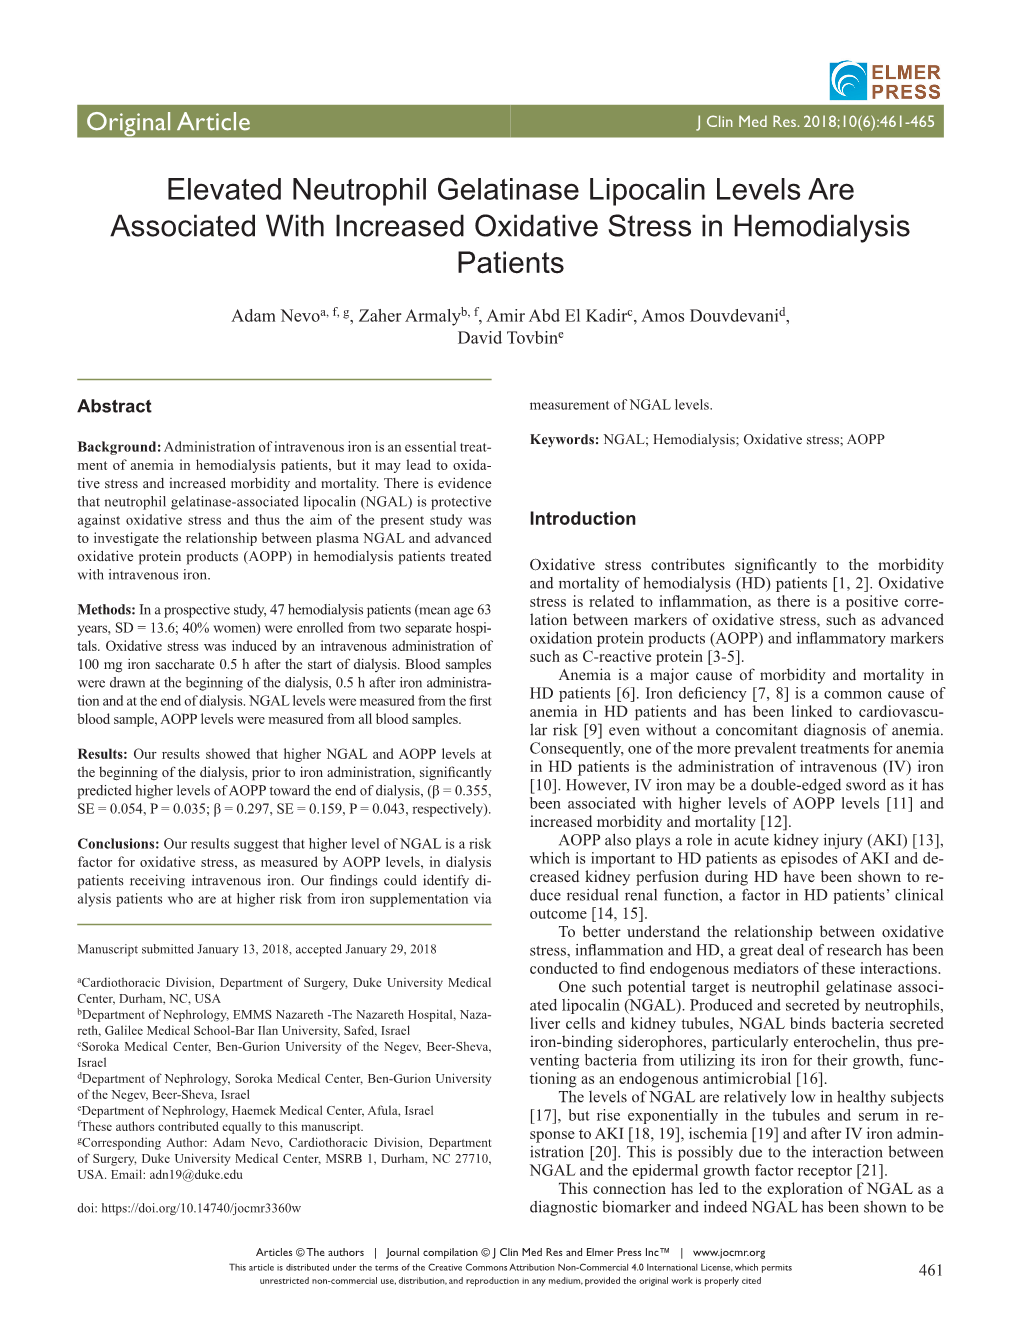 Elevated Neutrophil Gelatinase Lipocalin Levels Are Associated with Increased Oxidative Stress in Hemodialysis Patients